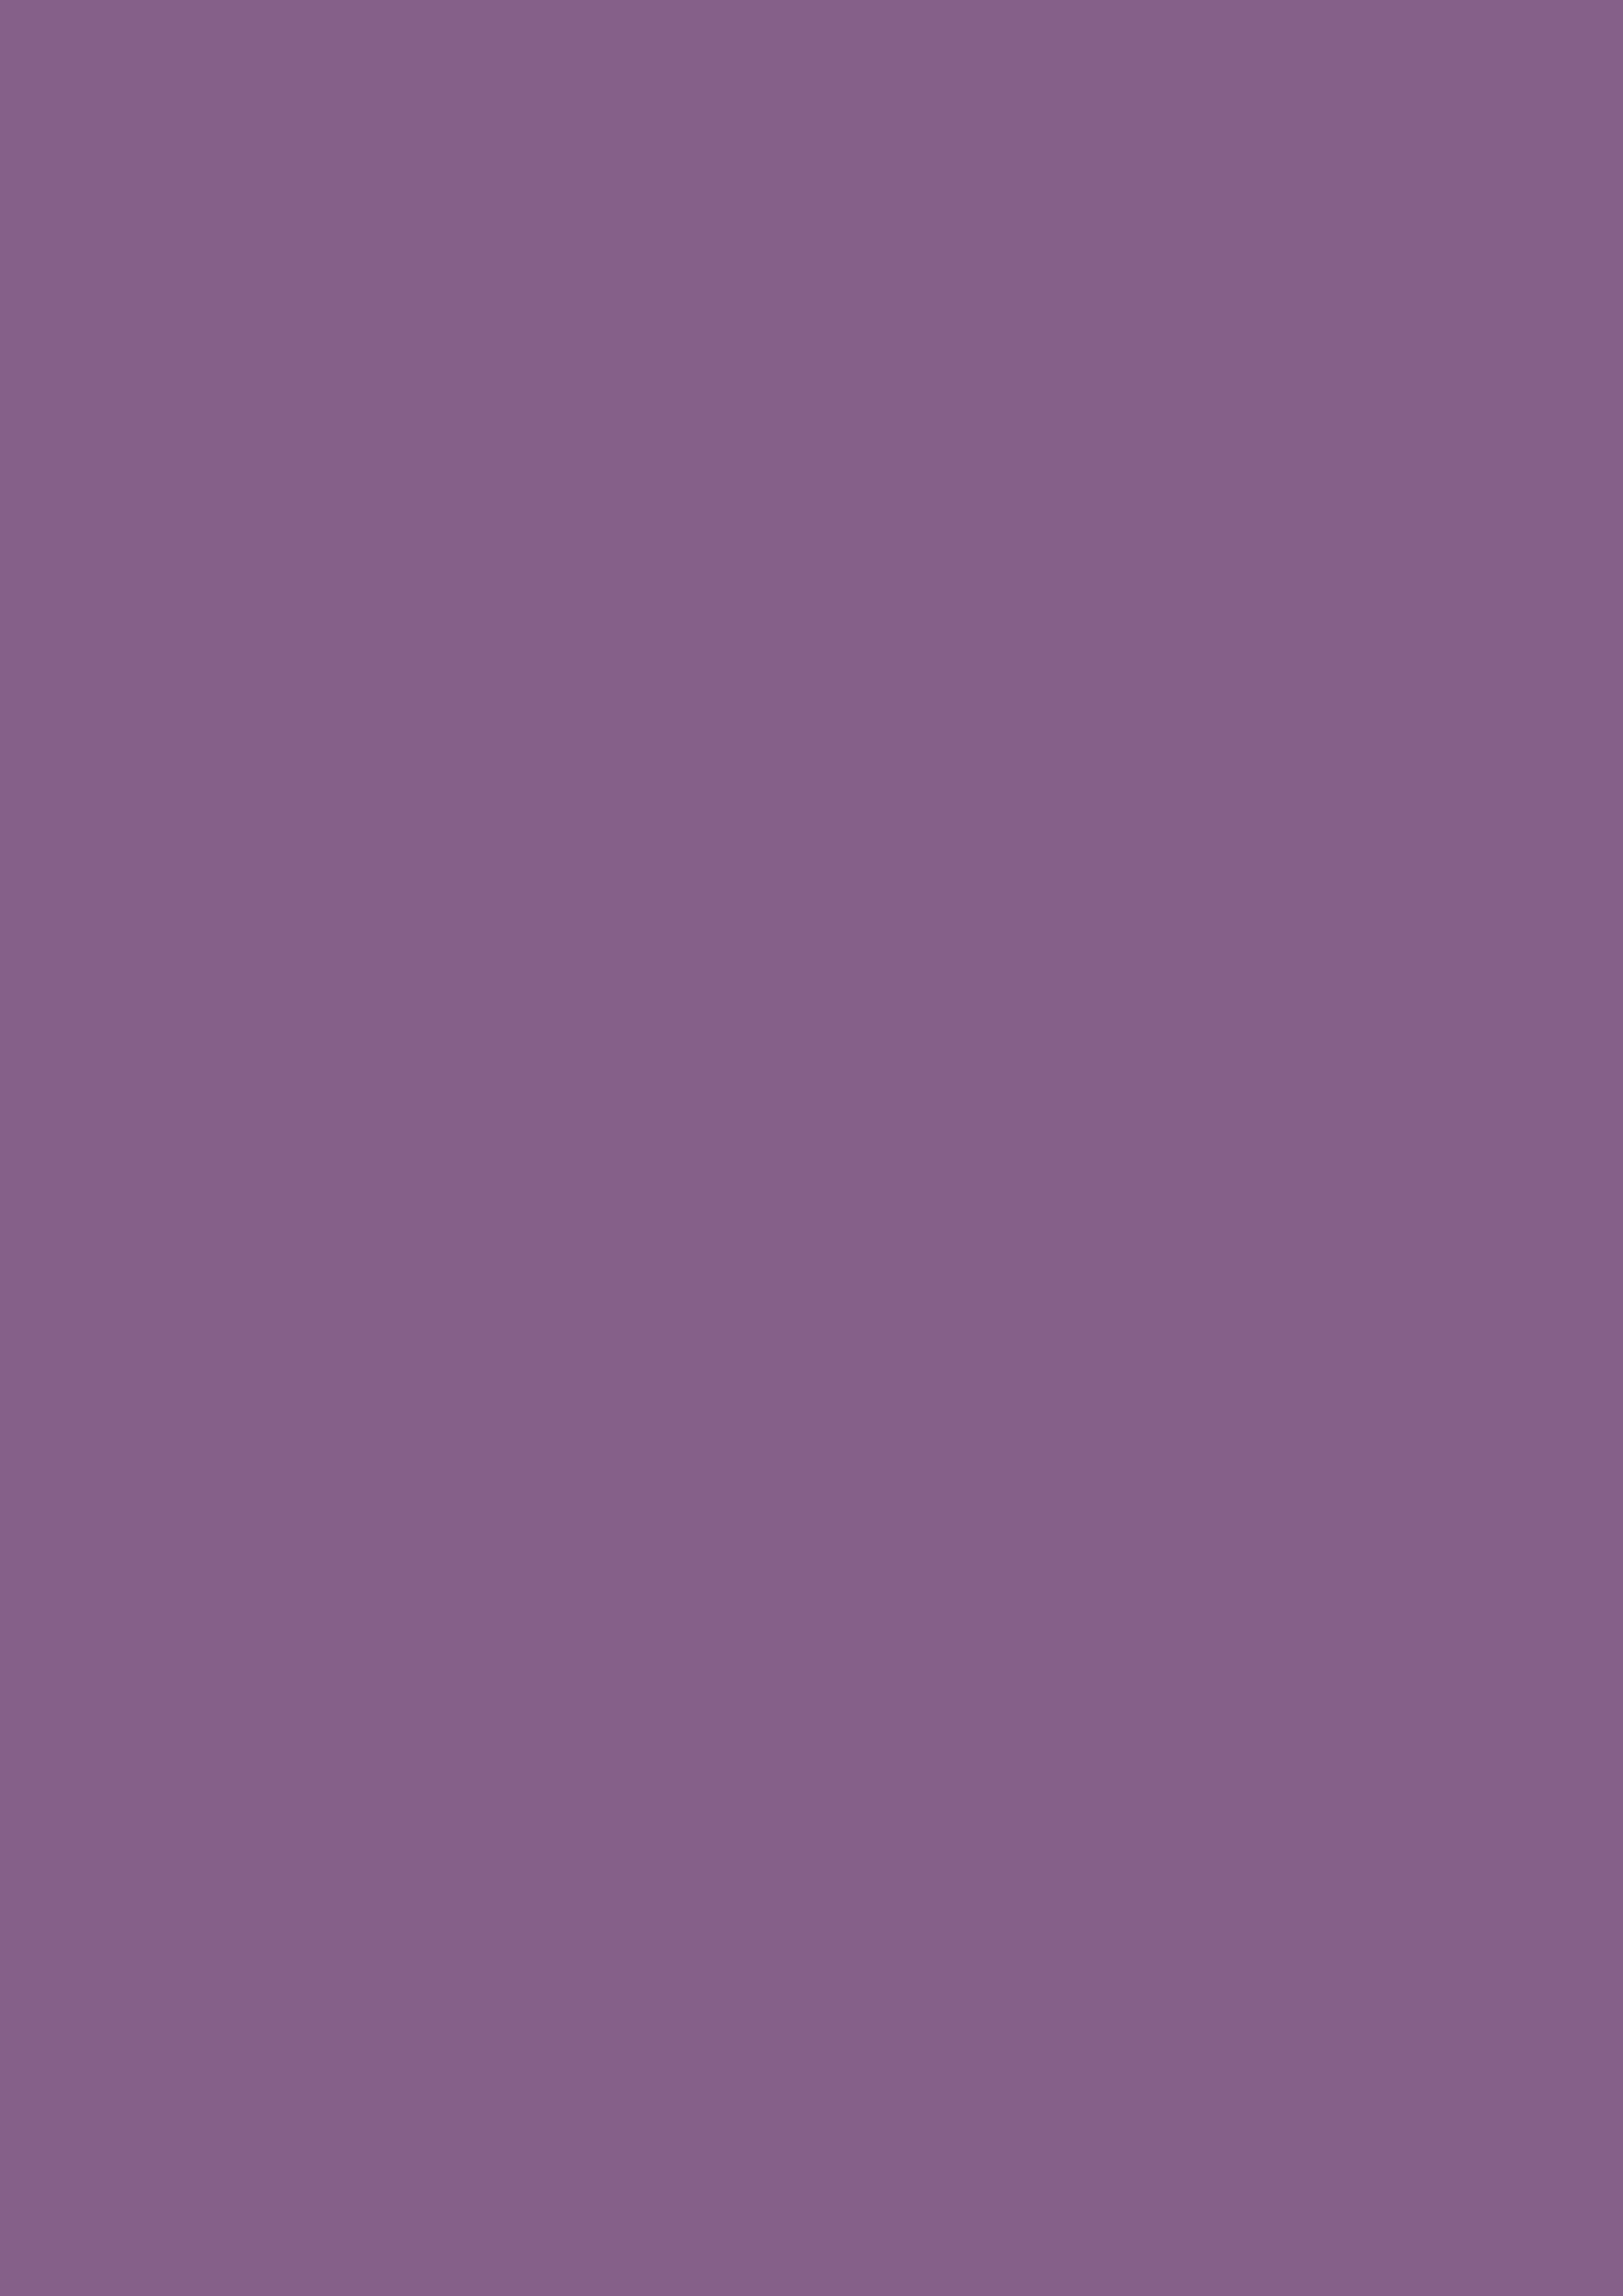 2480x3508 Chinese Violet Solid Color Background